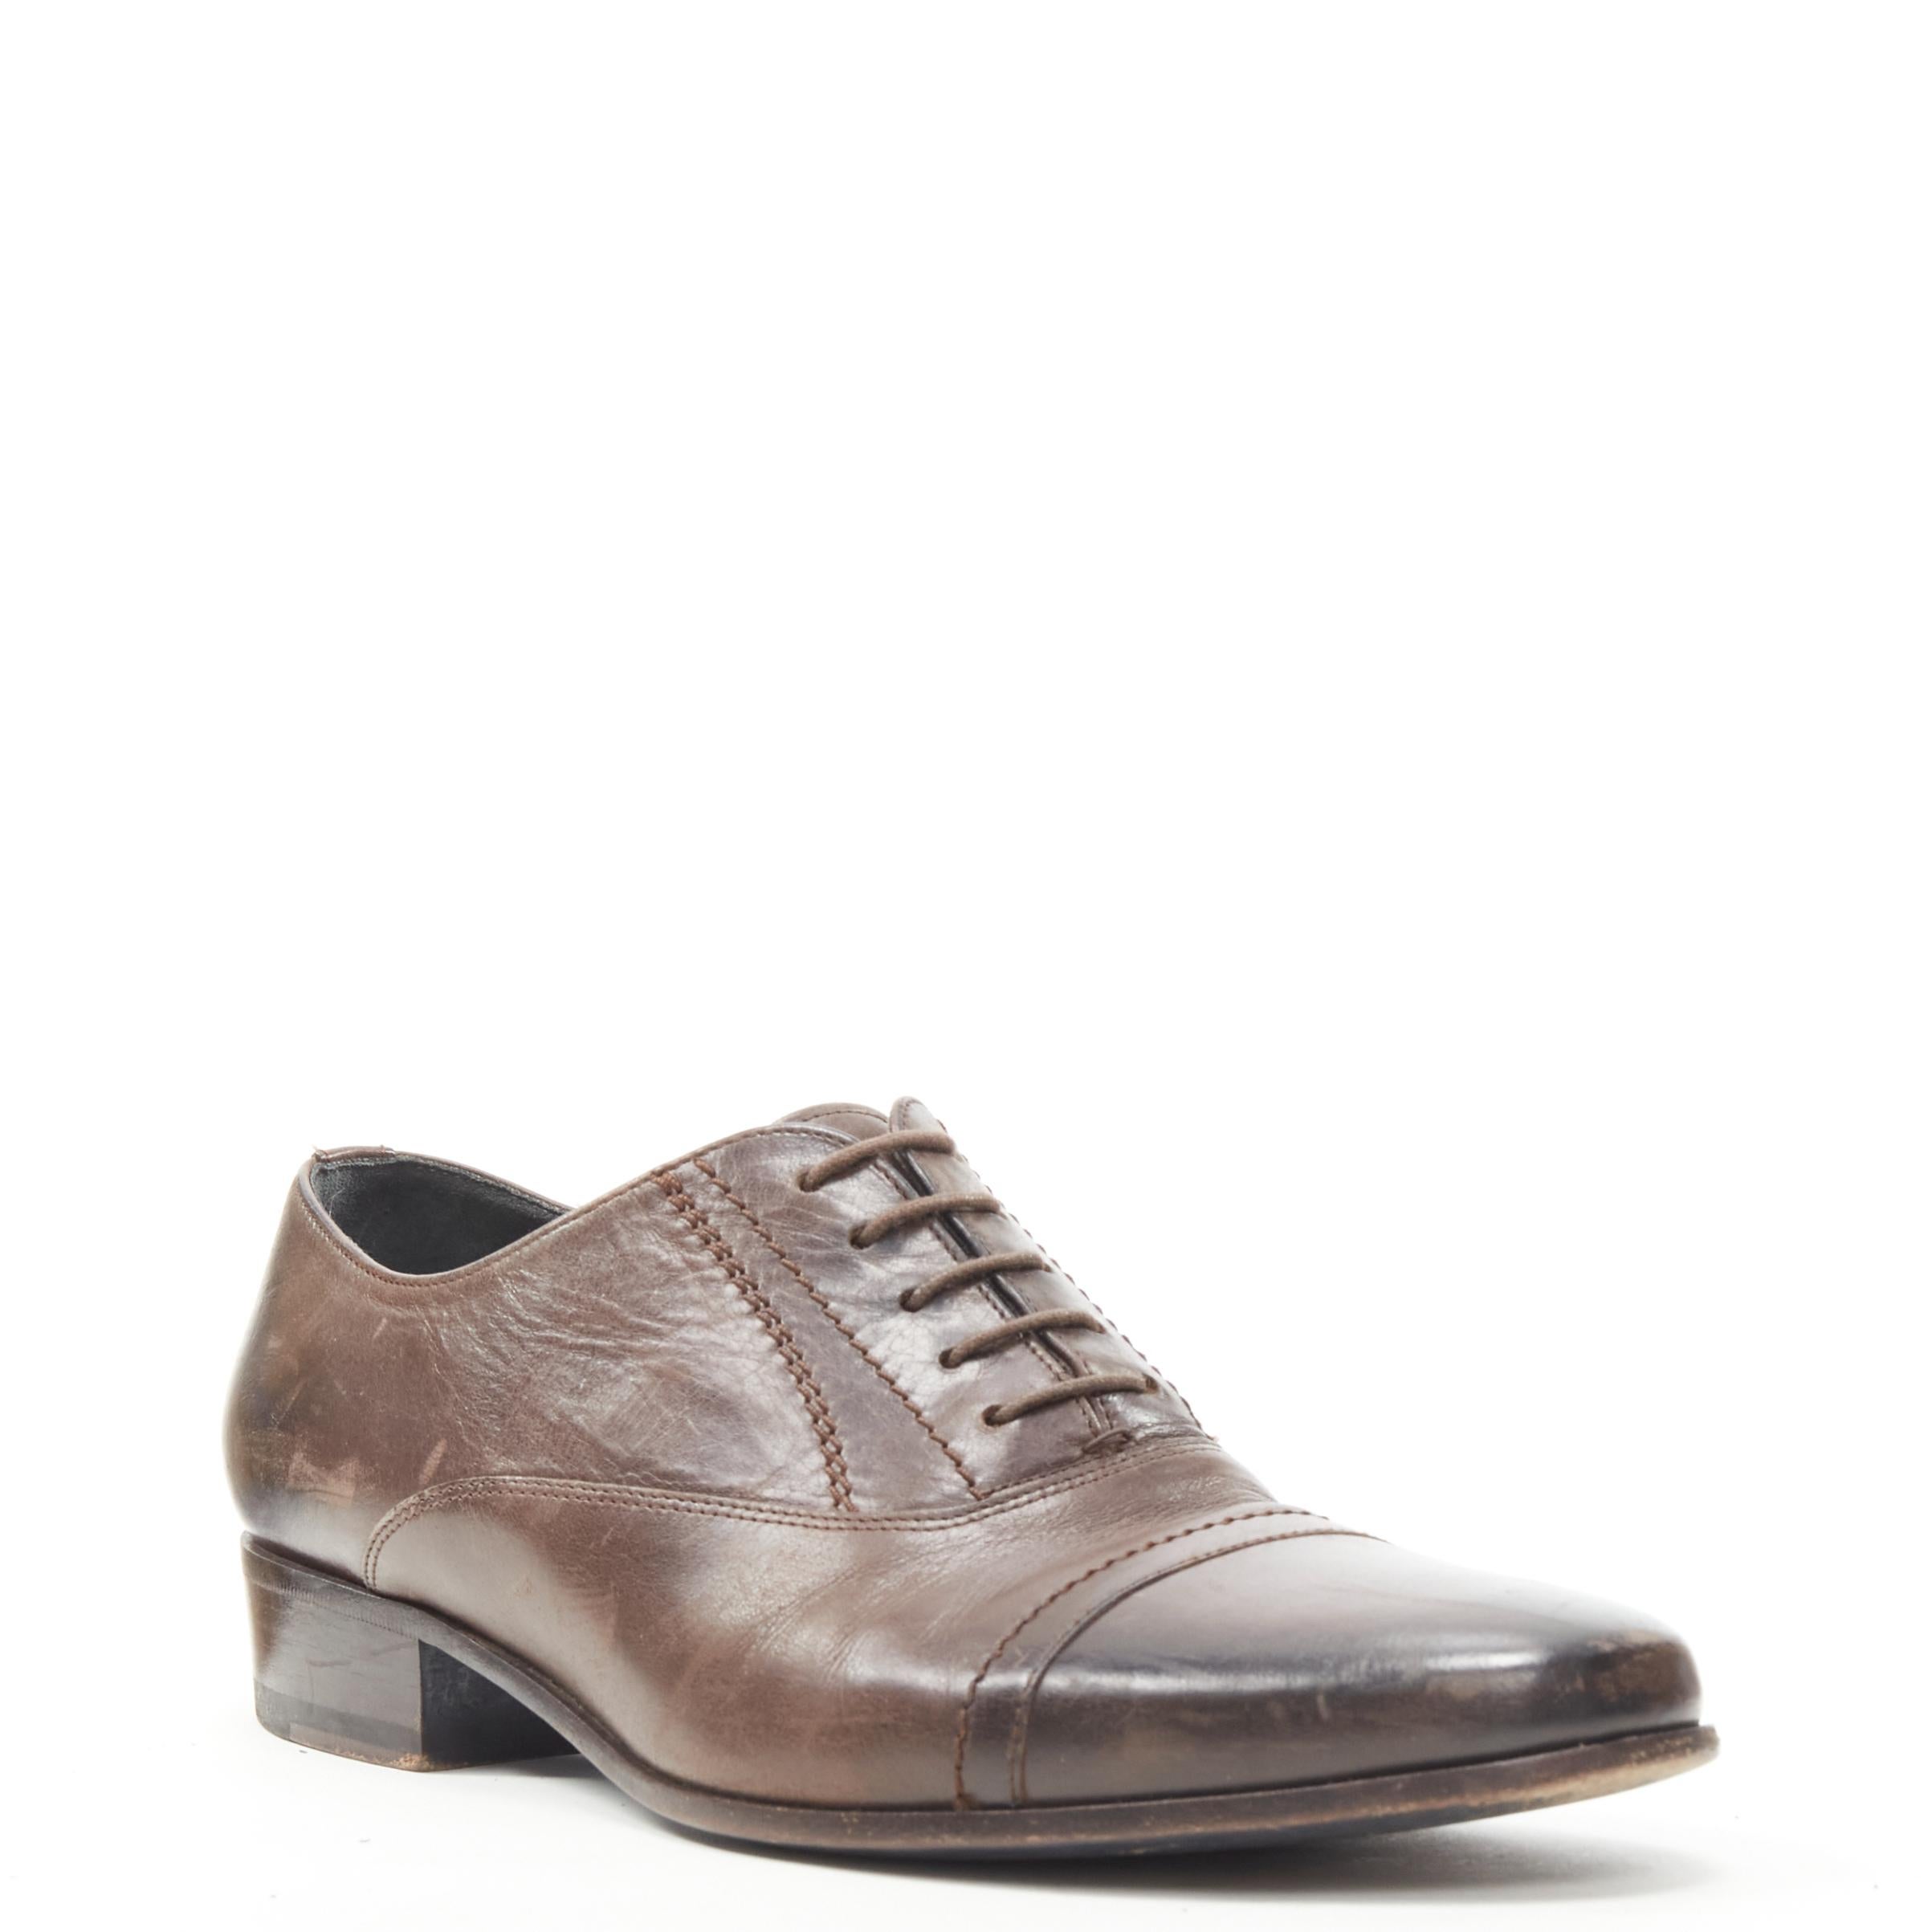 LANVIN brown calfskin lace up distressed scuffed leather dress shoes US8 EU41
Reference: CNLE/A00217
Brand: Lanvin
Designer: Alber Elbaz
Material: Leather
Color: Brown
Pattern: Solid
Closure: Lace Up
Lining: Leather
Made in: